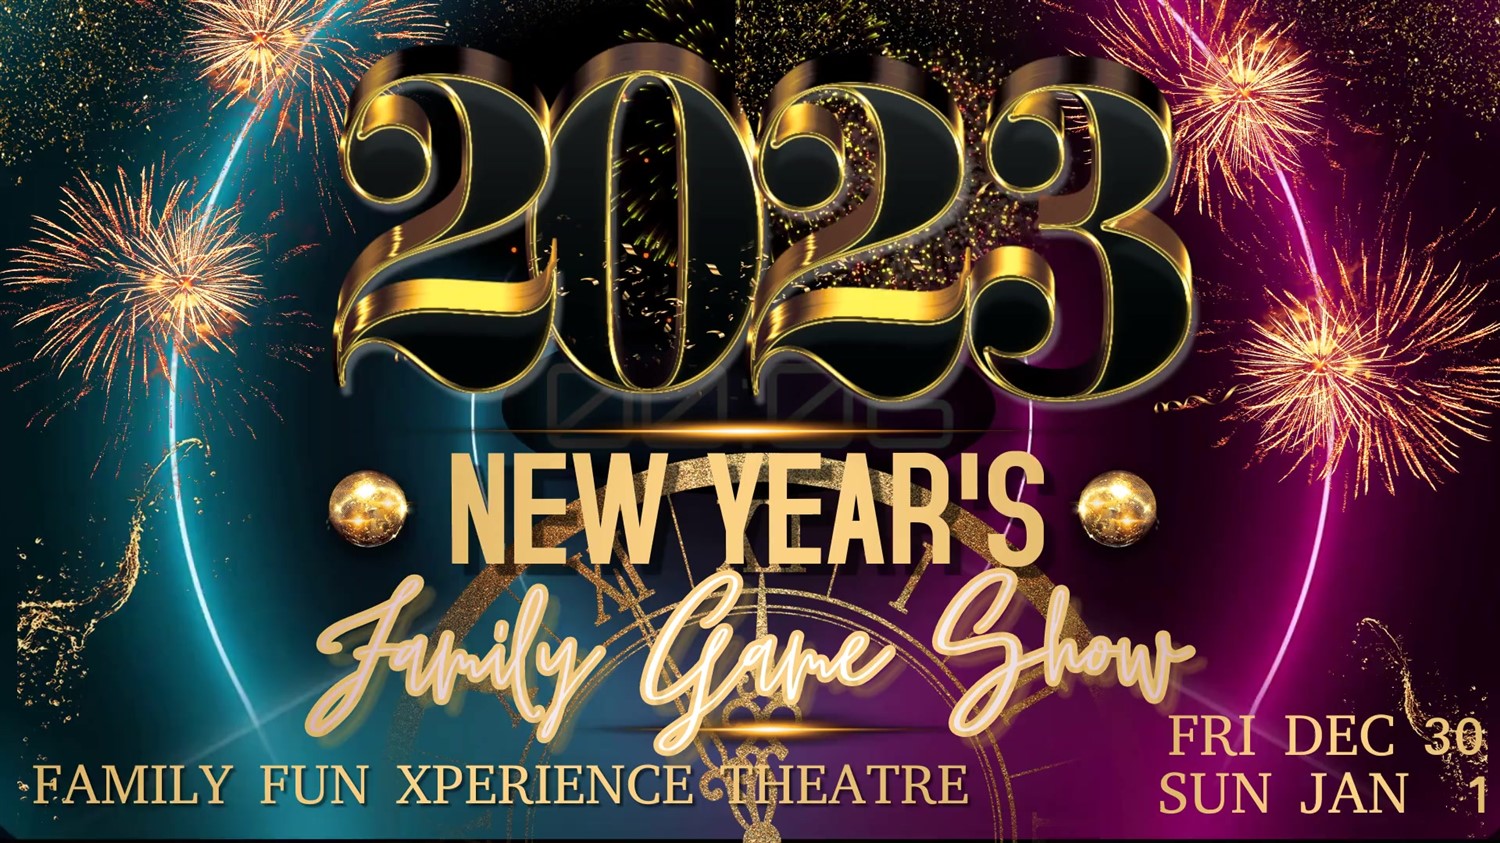 NEW YEARS FAMILY GAME SHOW  on Dec 30, 19:00@FFX Theatre - Pick a seat, Buy tickets and Get information on Family Fun Xperience tickets.ffxshow.org